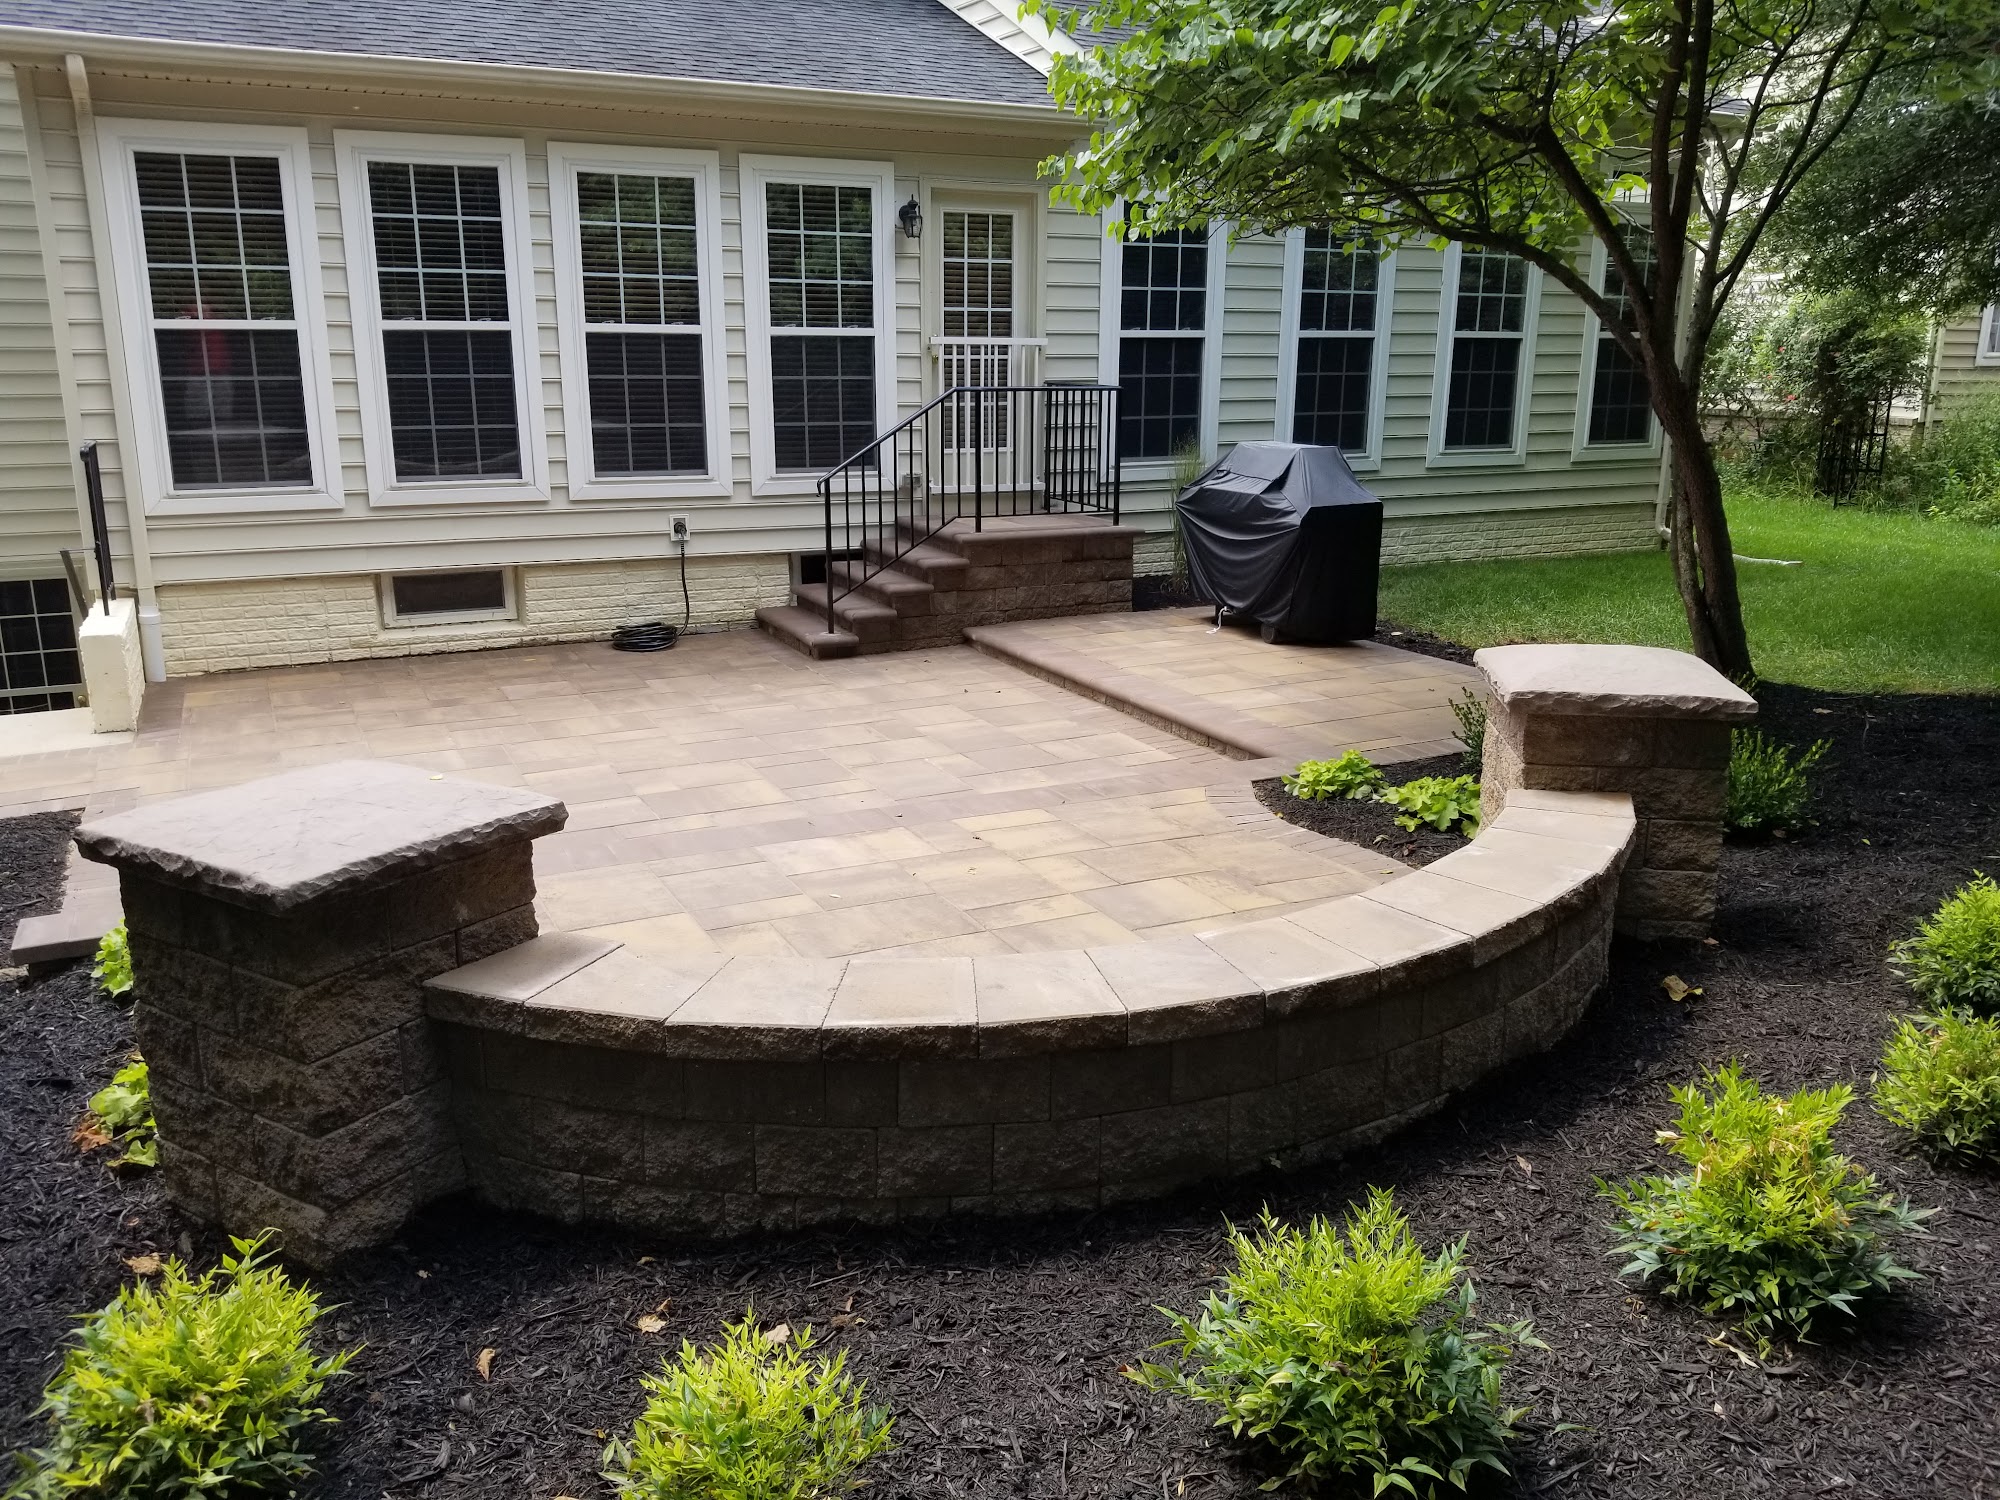 Lifestyle Pond and Patio